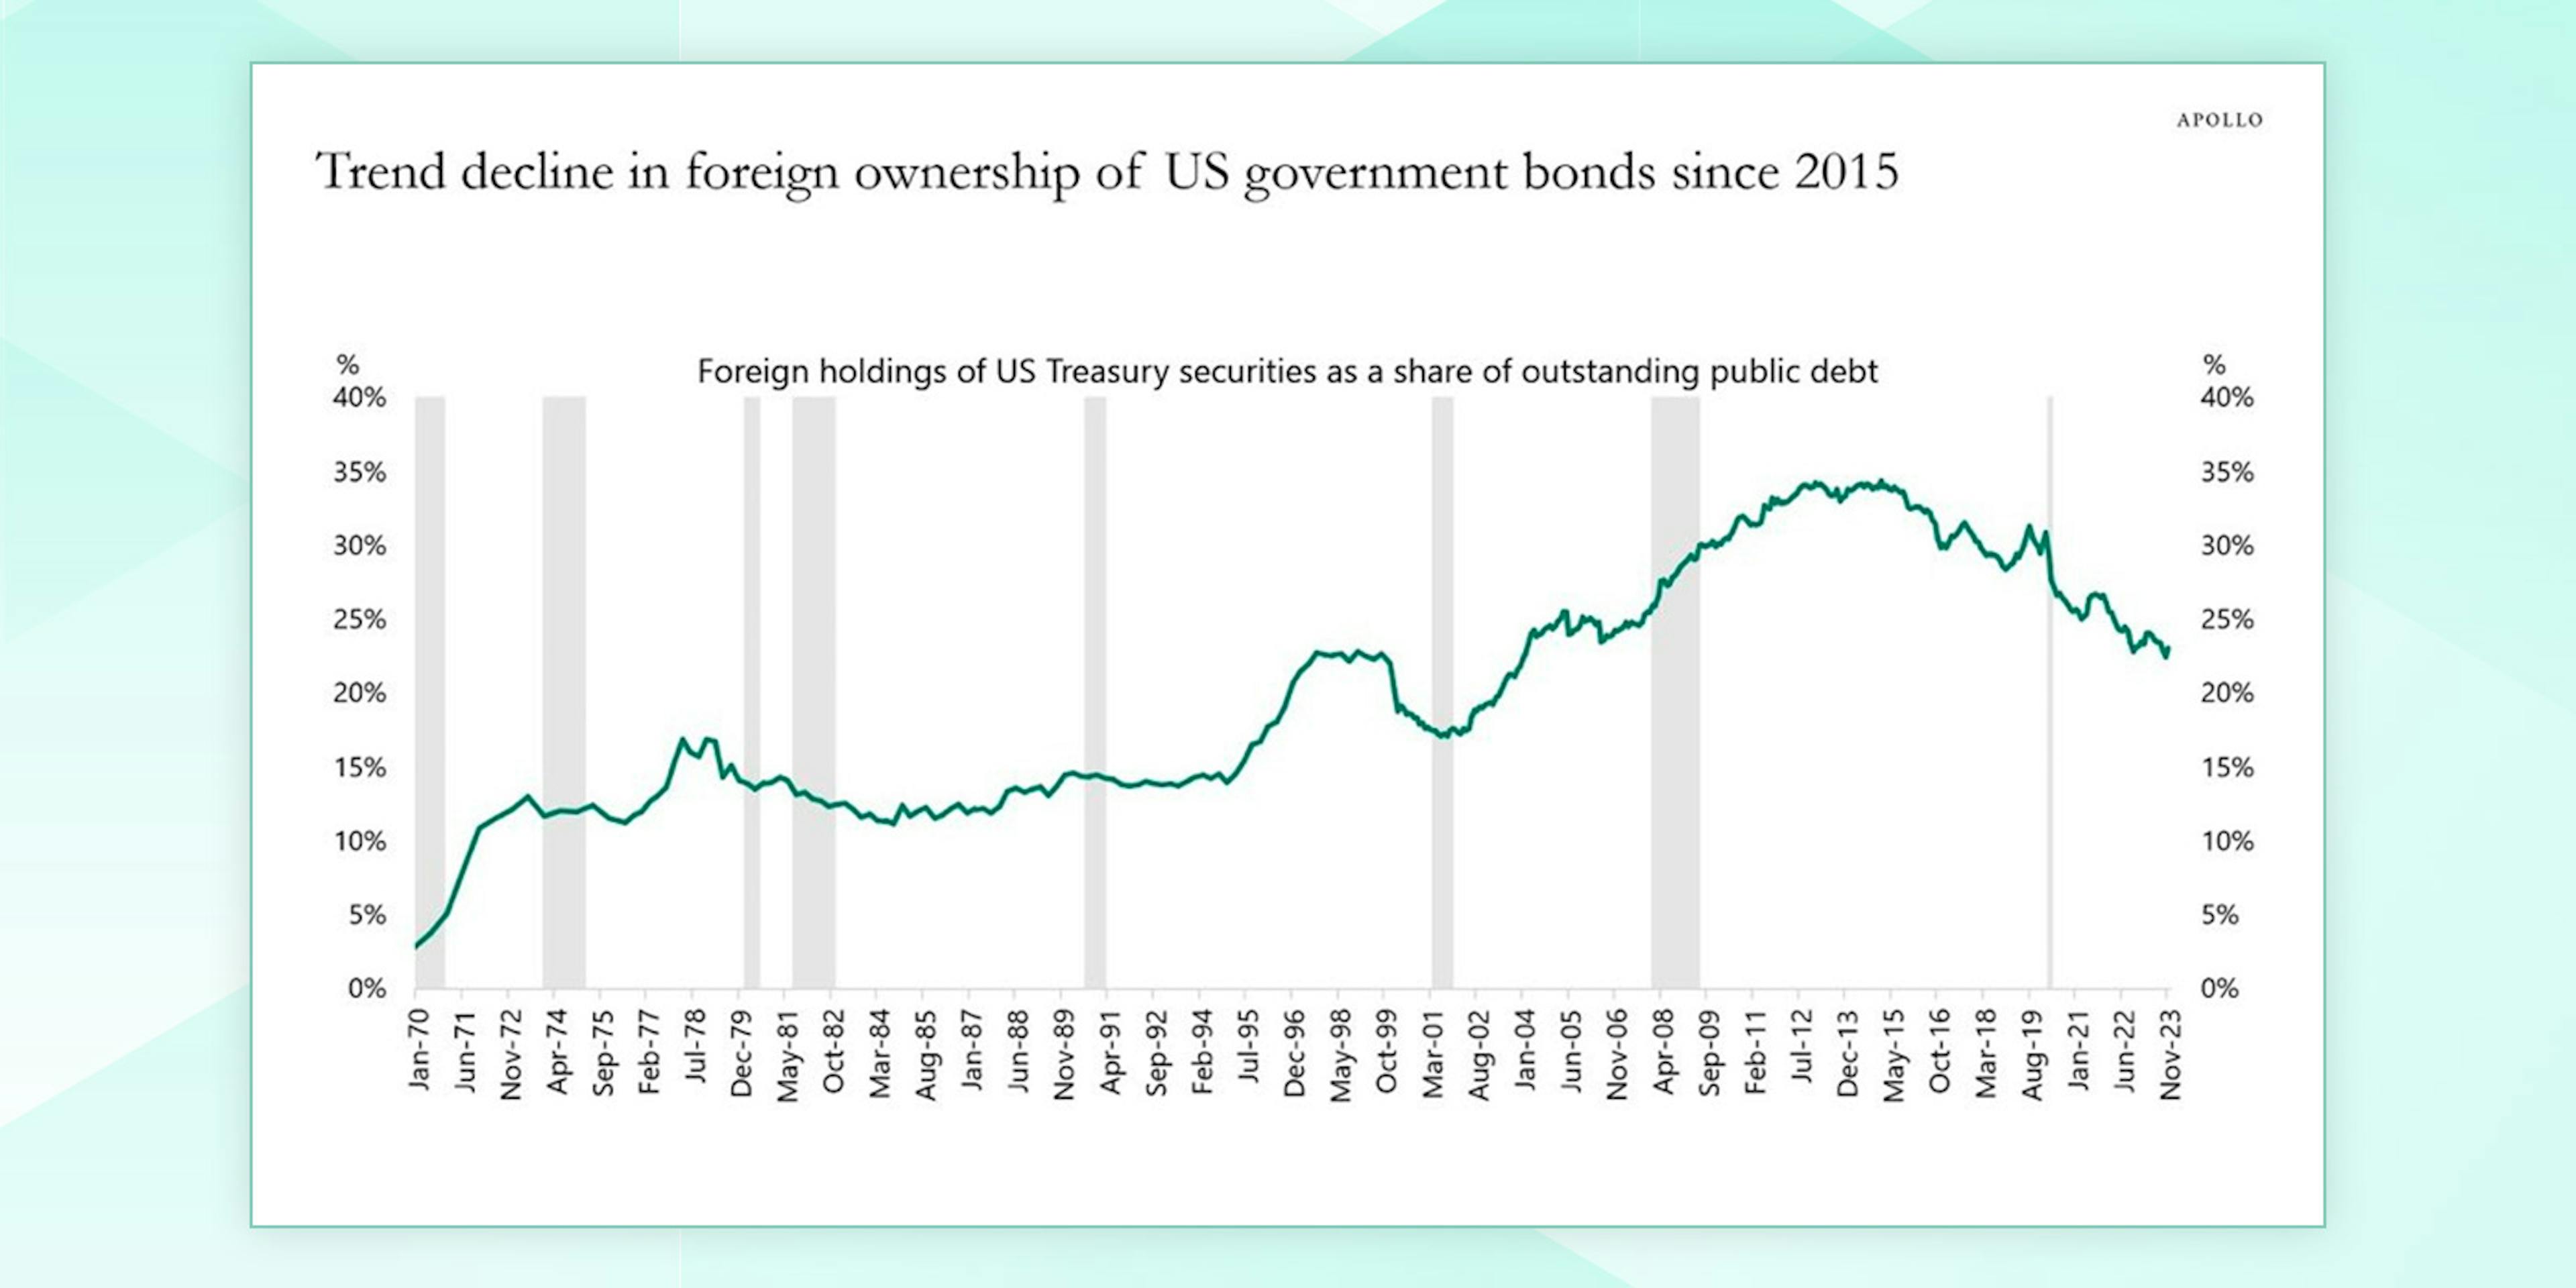 Trend decline in foreign ownership of US government bonds since 2015